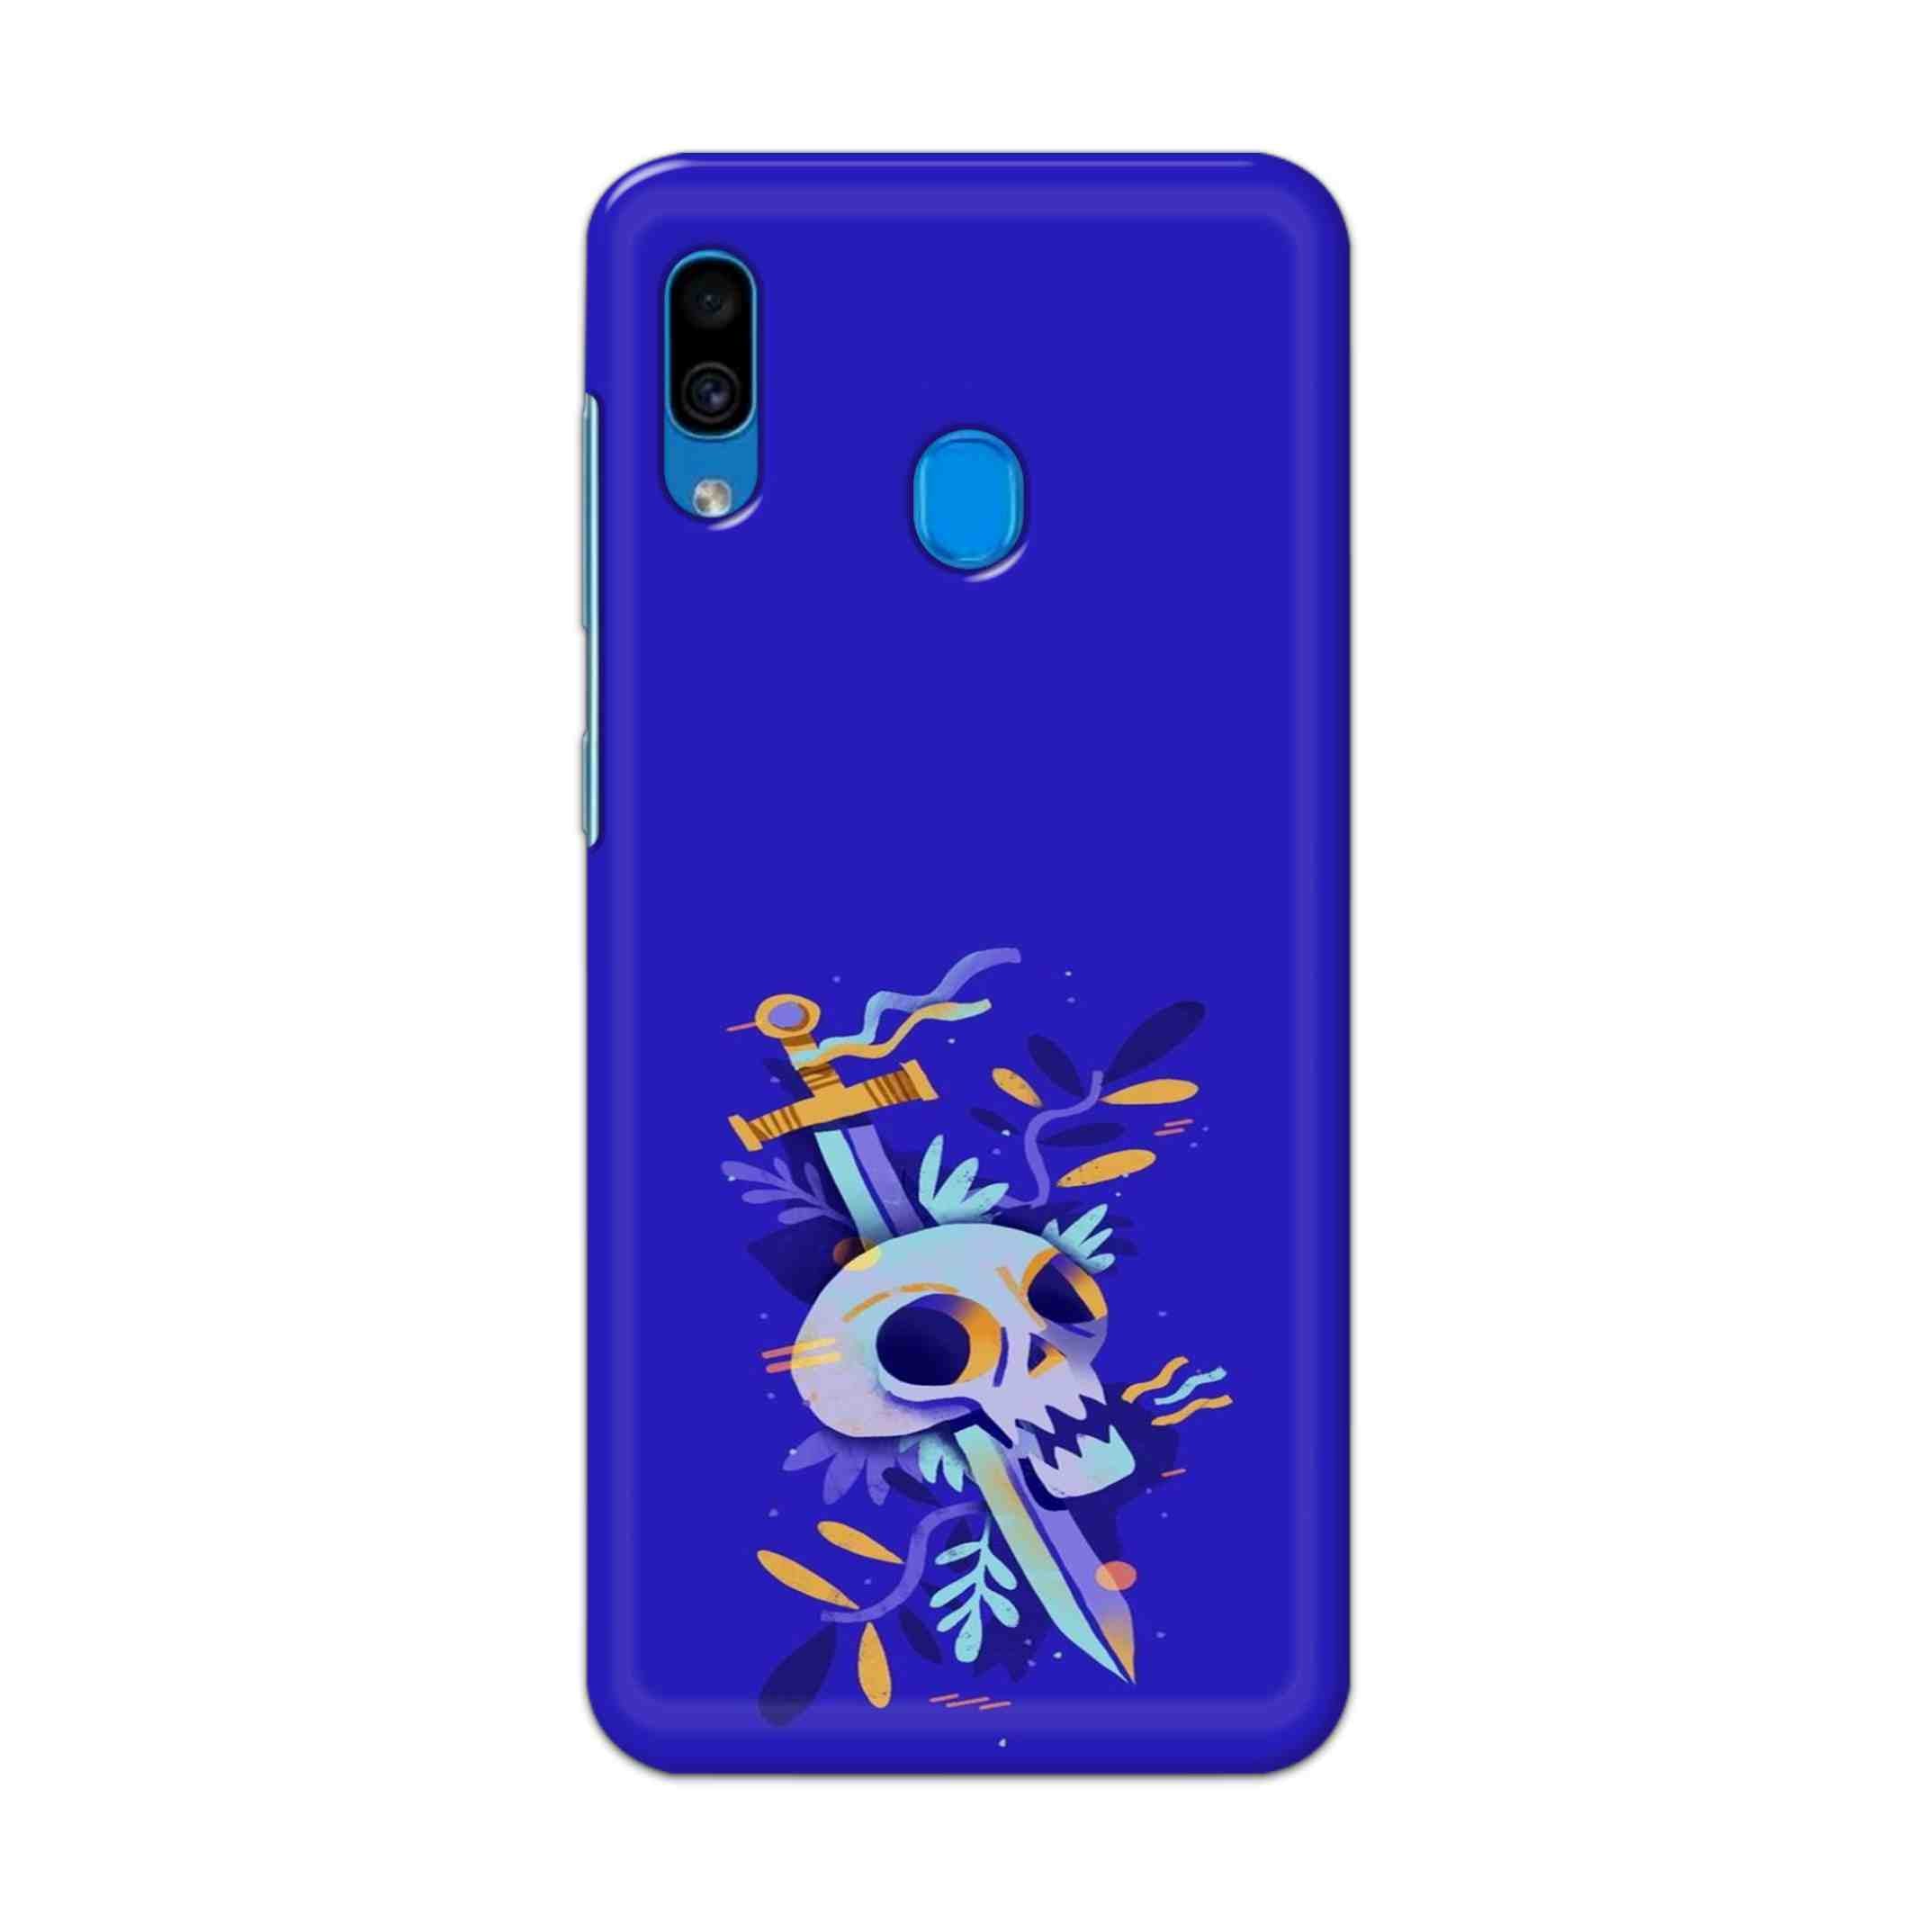 Buy Blue Skull Hard Back Mobile Phone Case Cover For Samsung Galaxy A30 Online